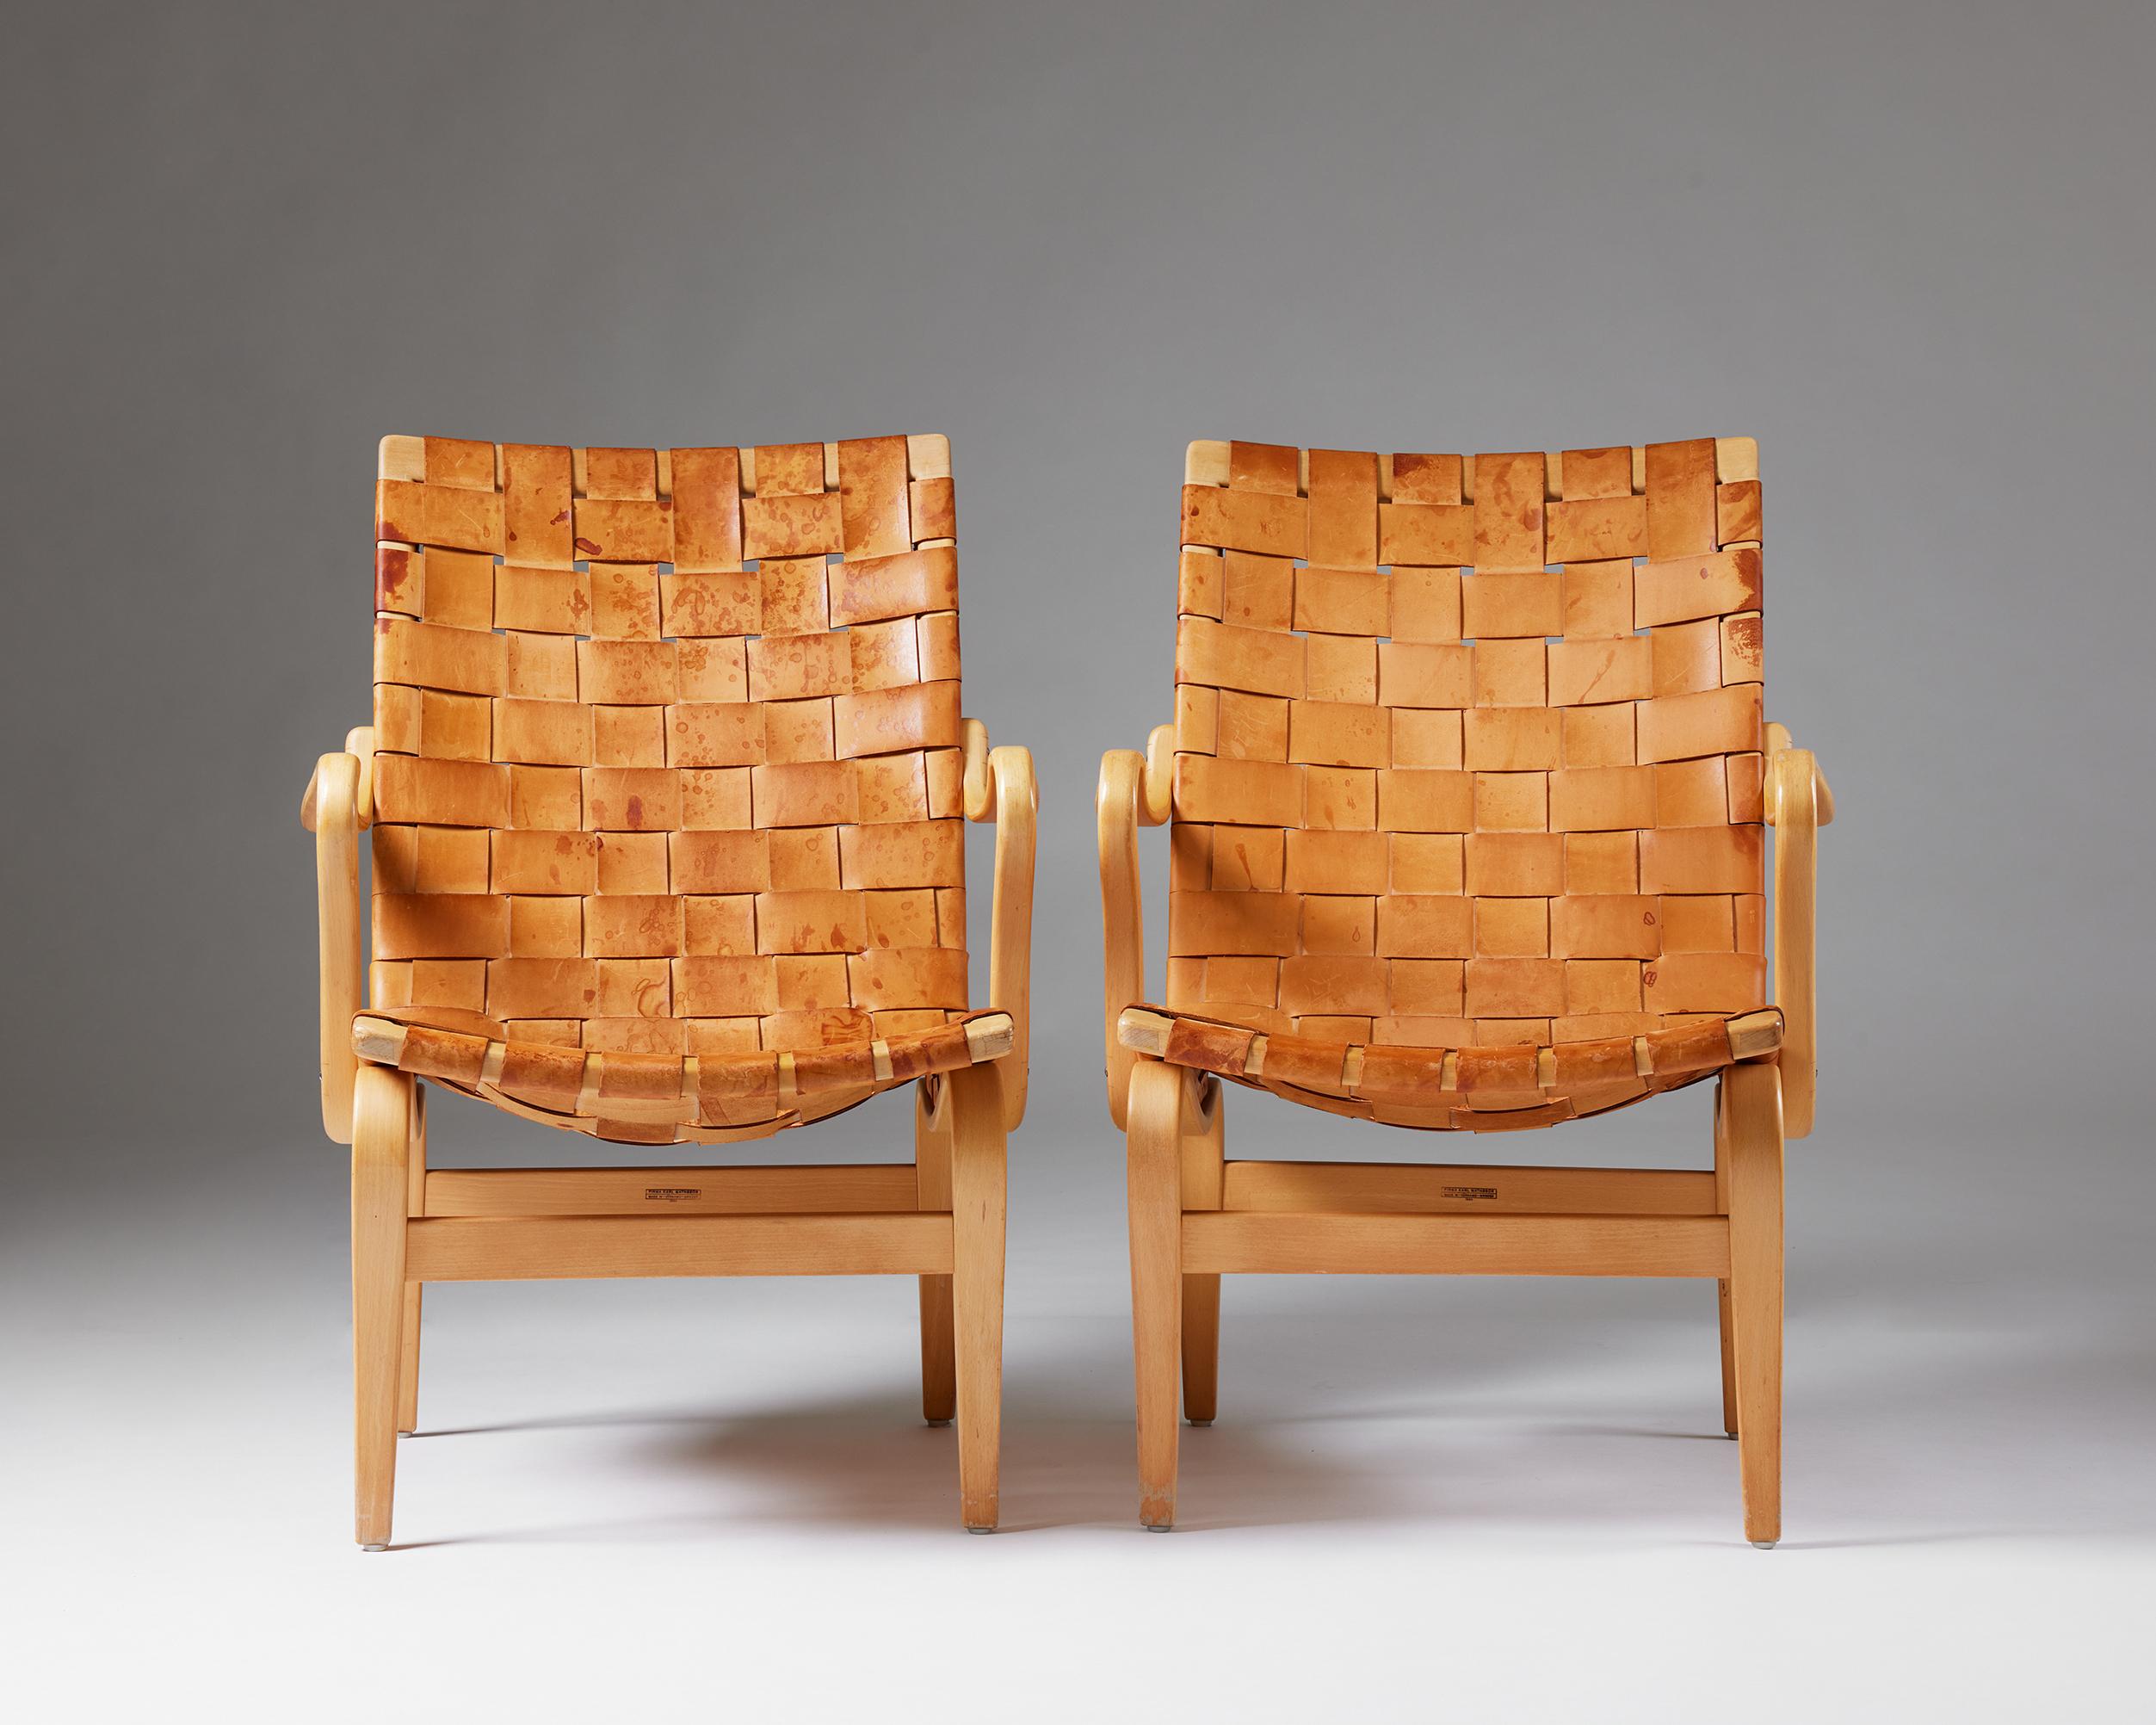 Pair of armchairs ‘Eva’ designed by Bruno Mathsson for Karl Mathsson, Swedish In Good Condition For Sale In Stockholm, SE